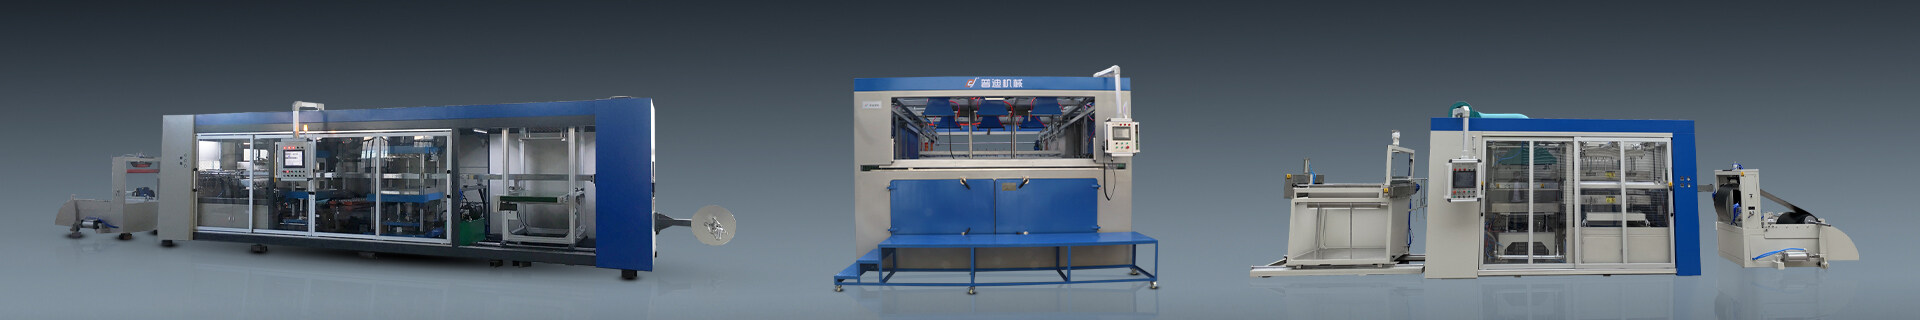 thermoforming machine components,parts of a vacuum forming machine,thermoforming molds,blister injection molding,thermoform molding